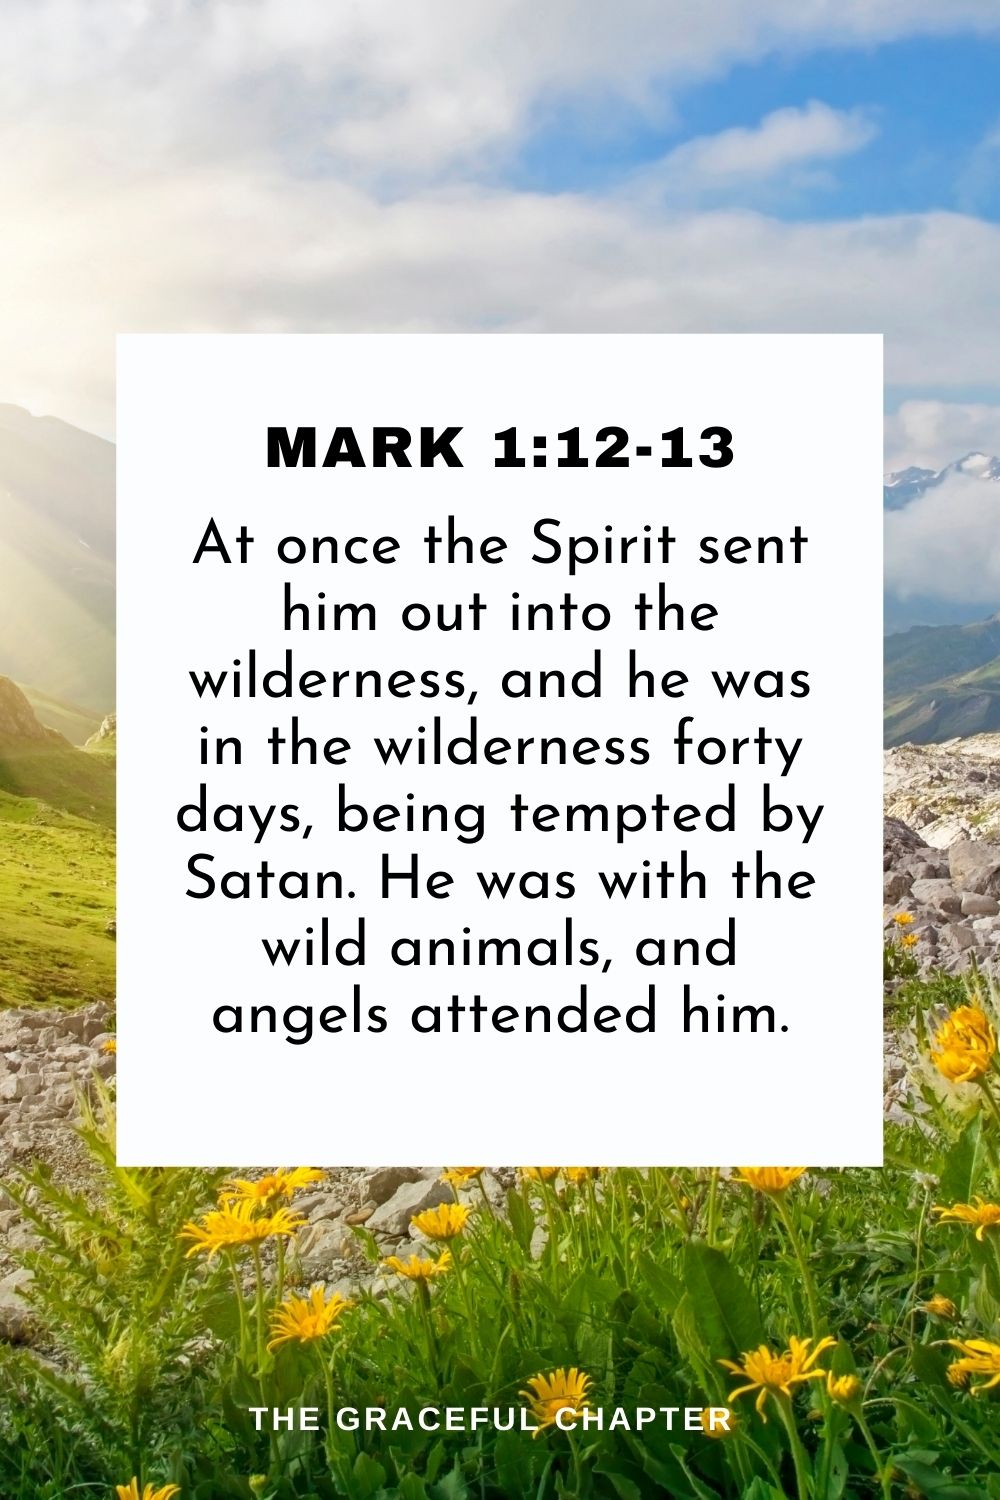 At once the Spirit sent him out into the wilderness, and he was in the wilderness forty days, being tempted by Satan. He was with the wild animals, and angels attended him. Mark 1:12-13